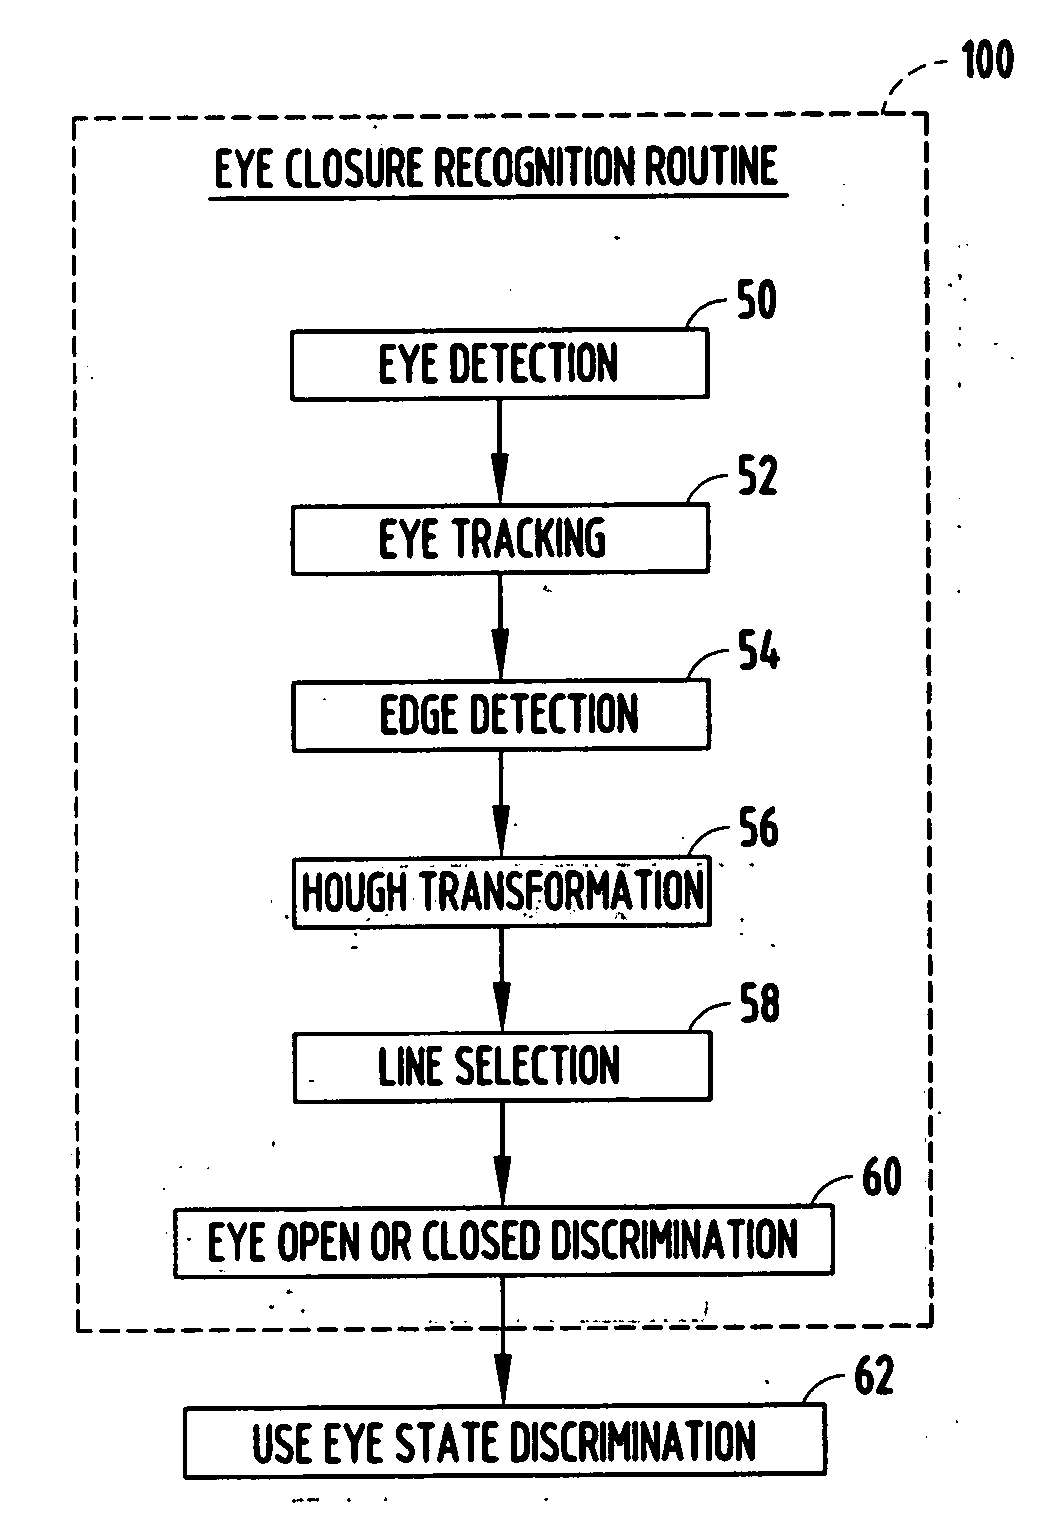 System and method of detecting eye closure based on edge lines